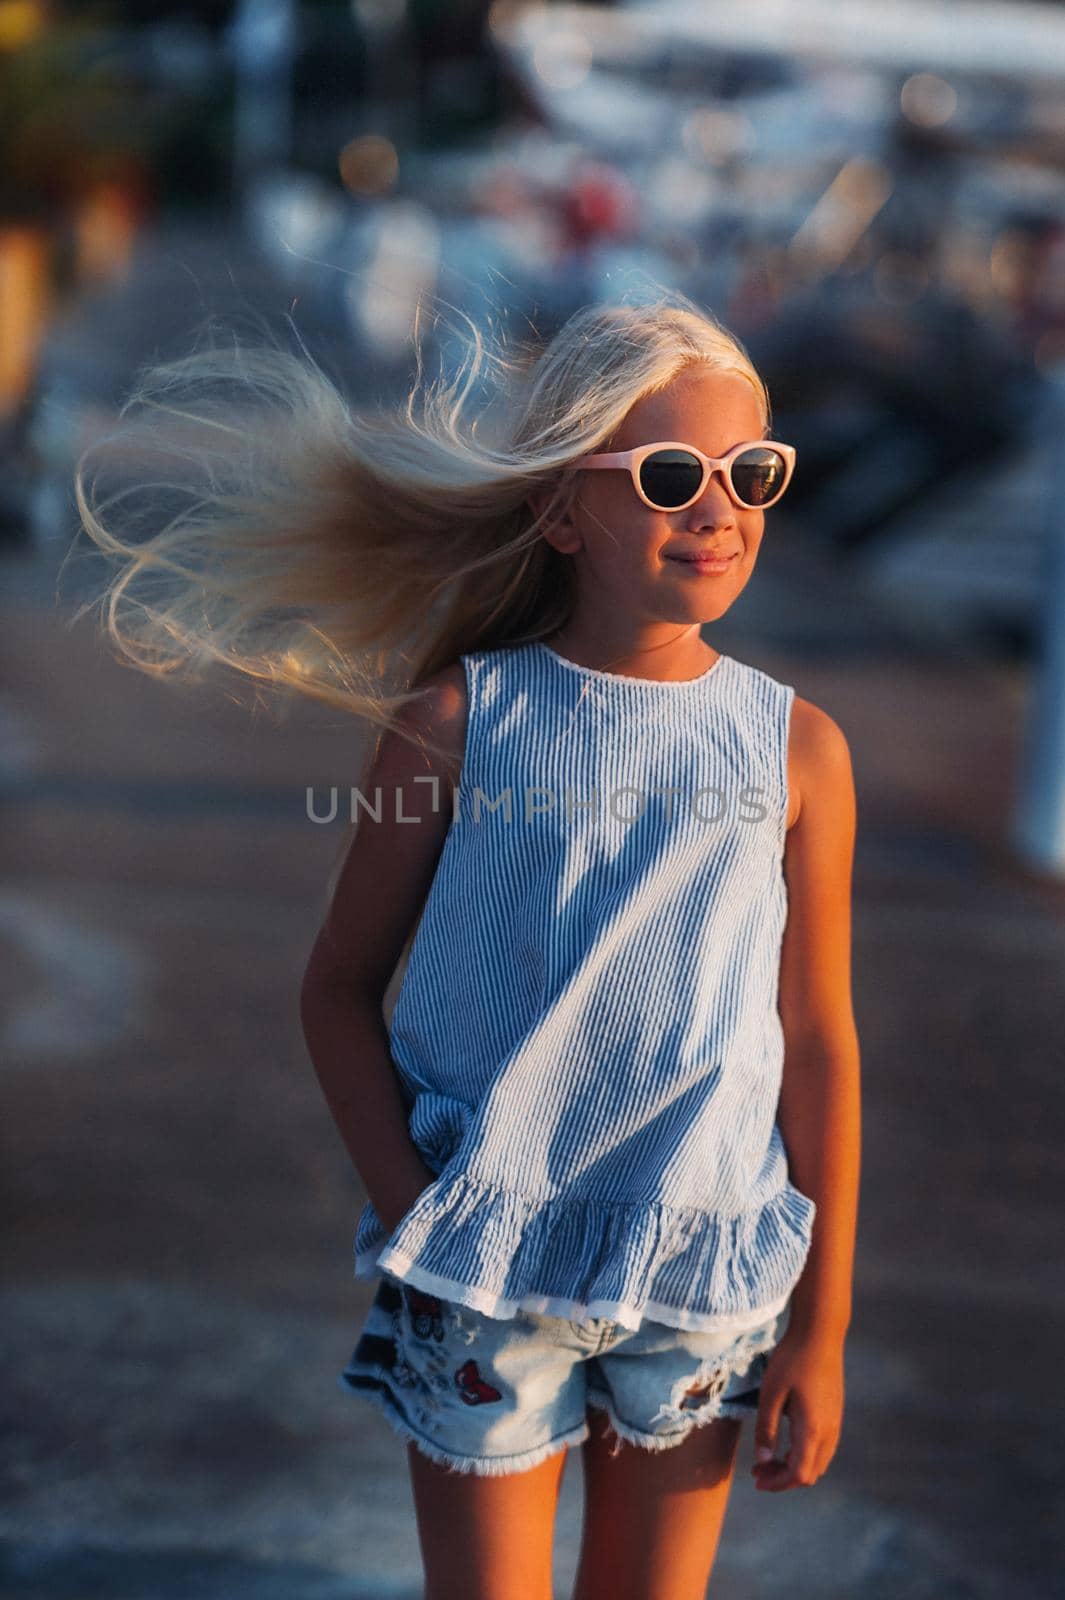 Portrait of a cute smiling ten-year-old girl with glasses.A girl in shorts and a blue t-shirt at sunset near the sea.Turkey by Lobachad